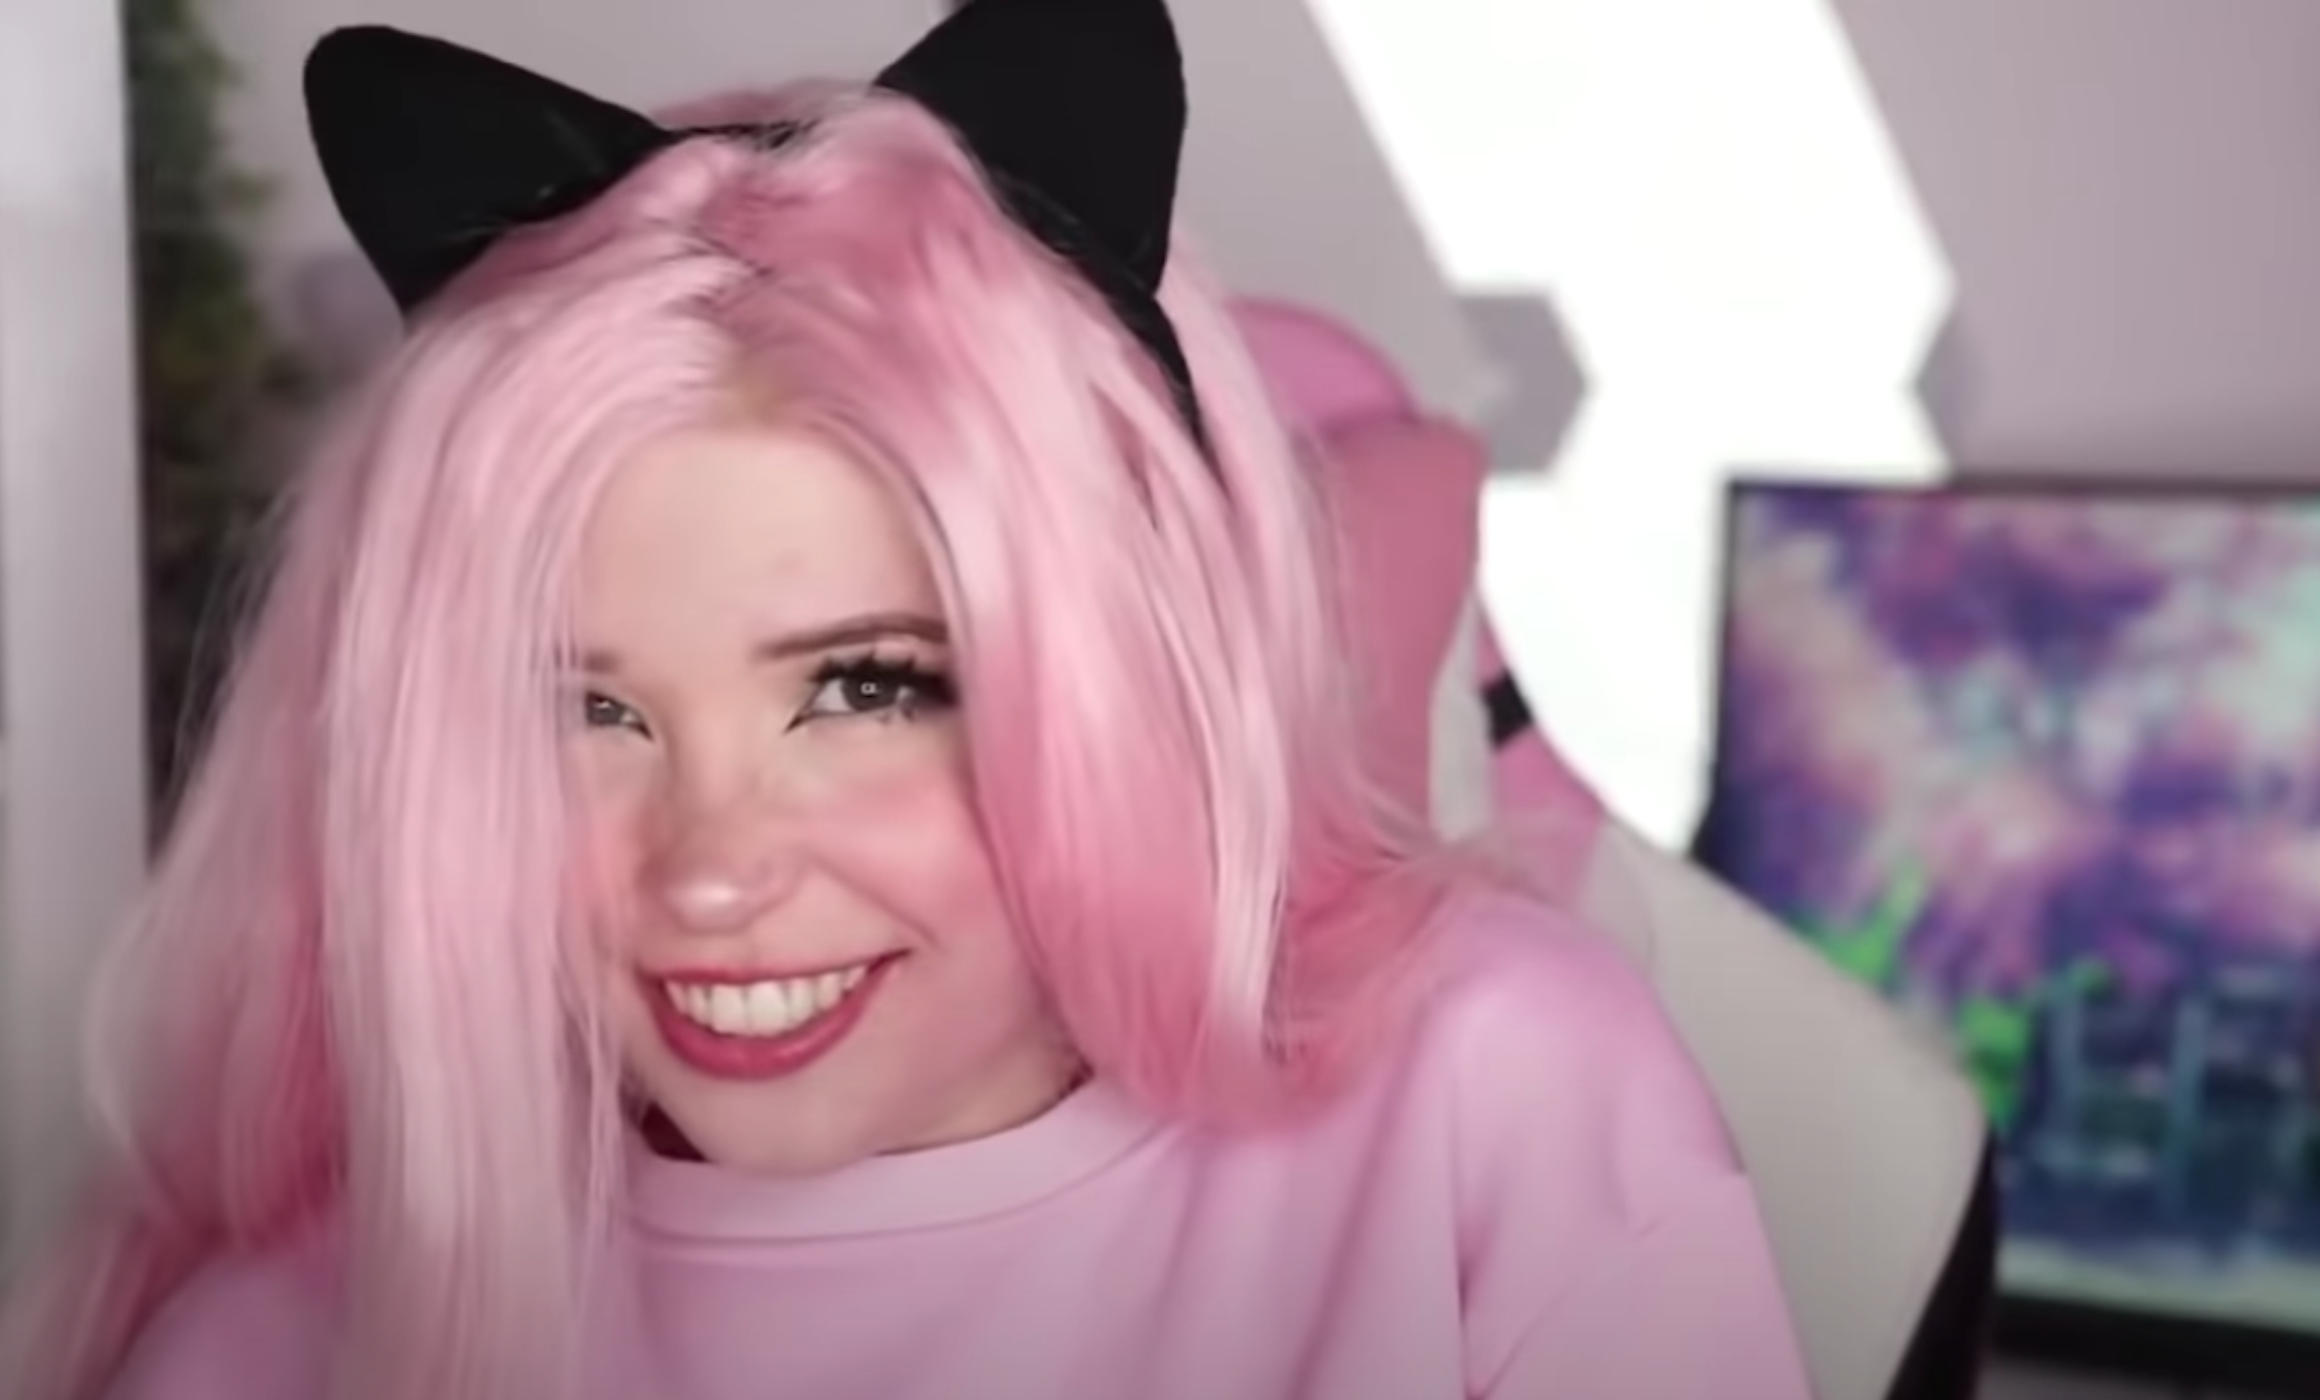 Belle delphine without